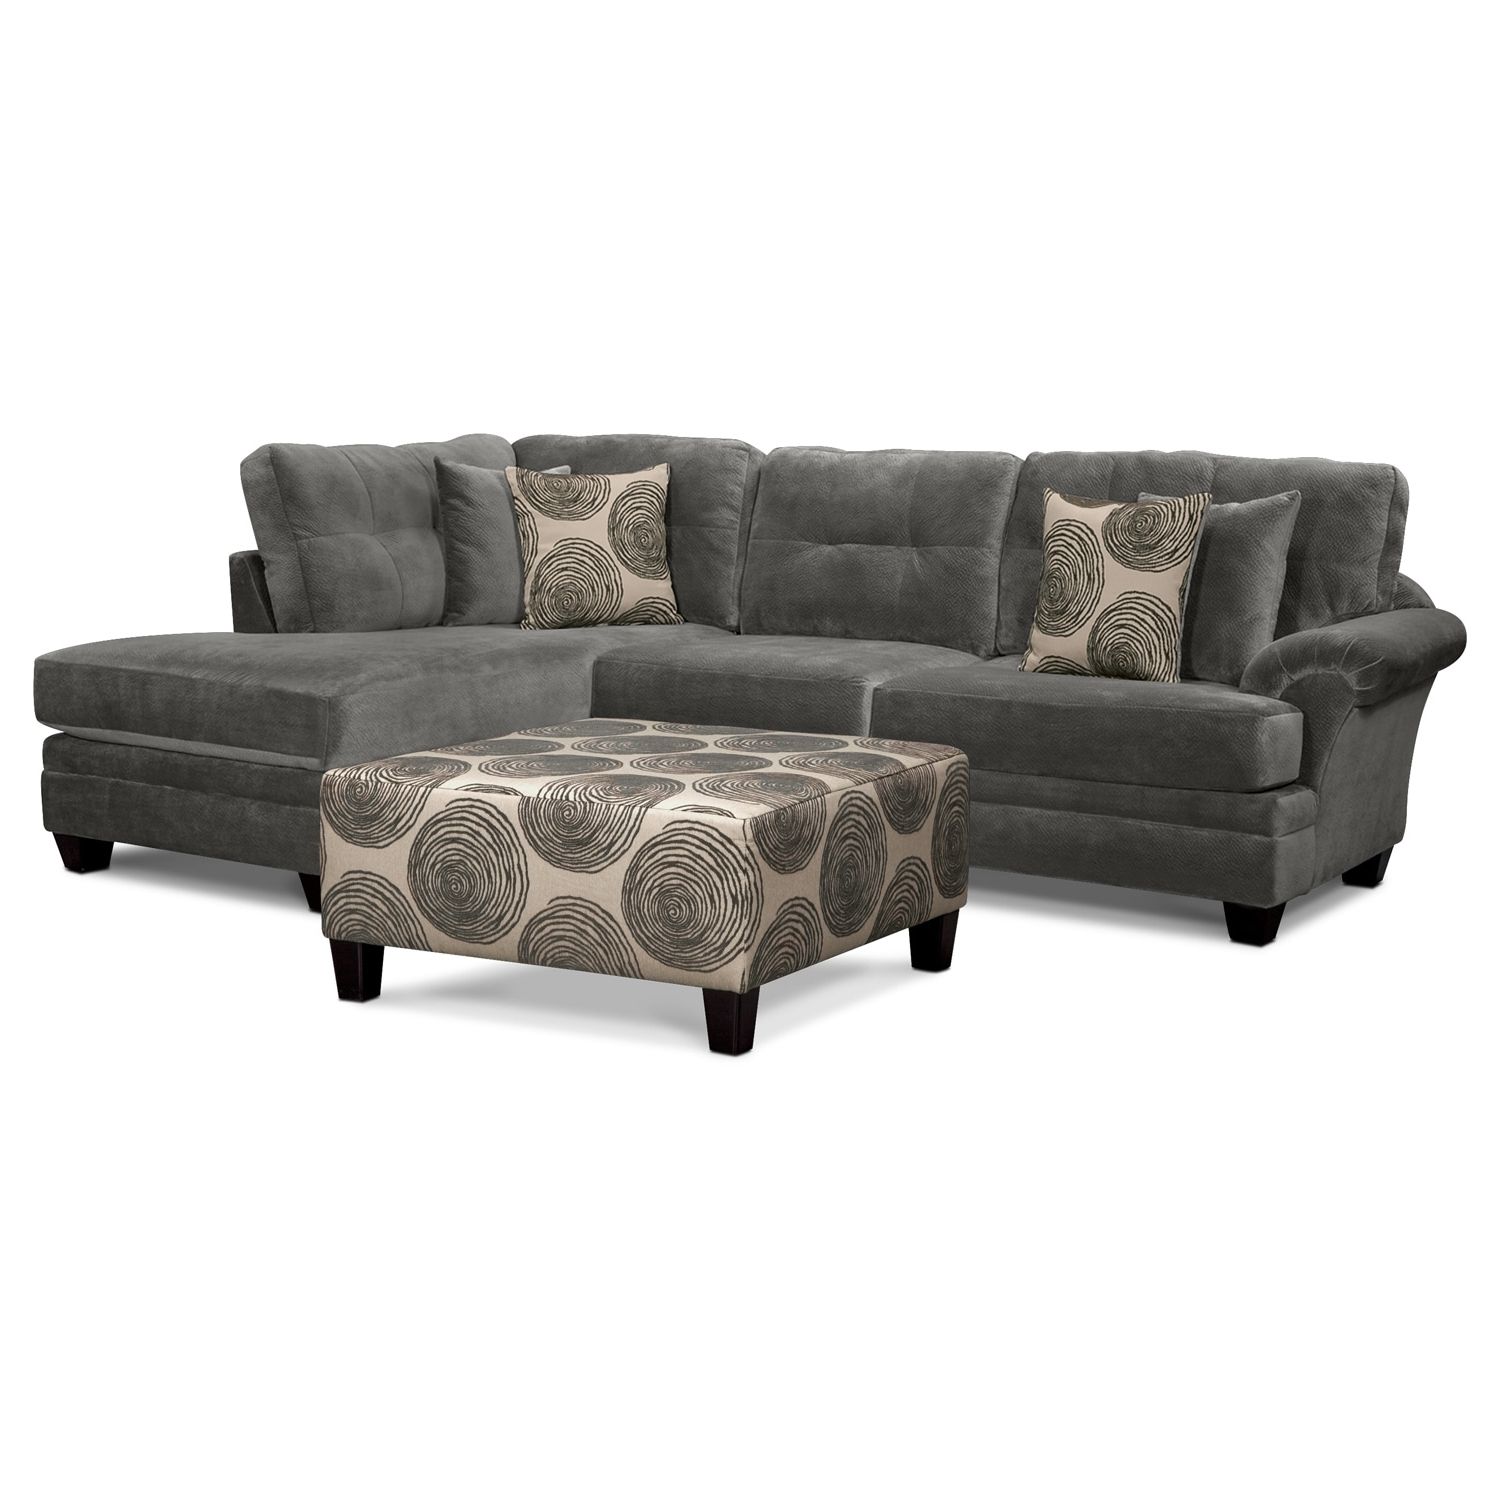 Value City Furniture For Most Up To Date Value City Sectional Sofas (Photo 6 of 15)